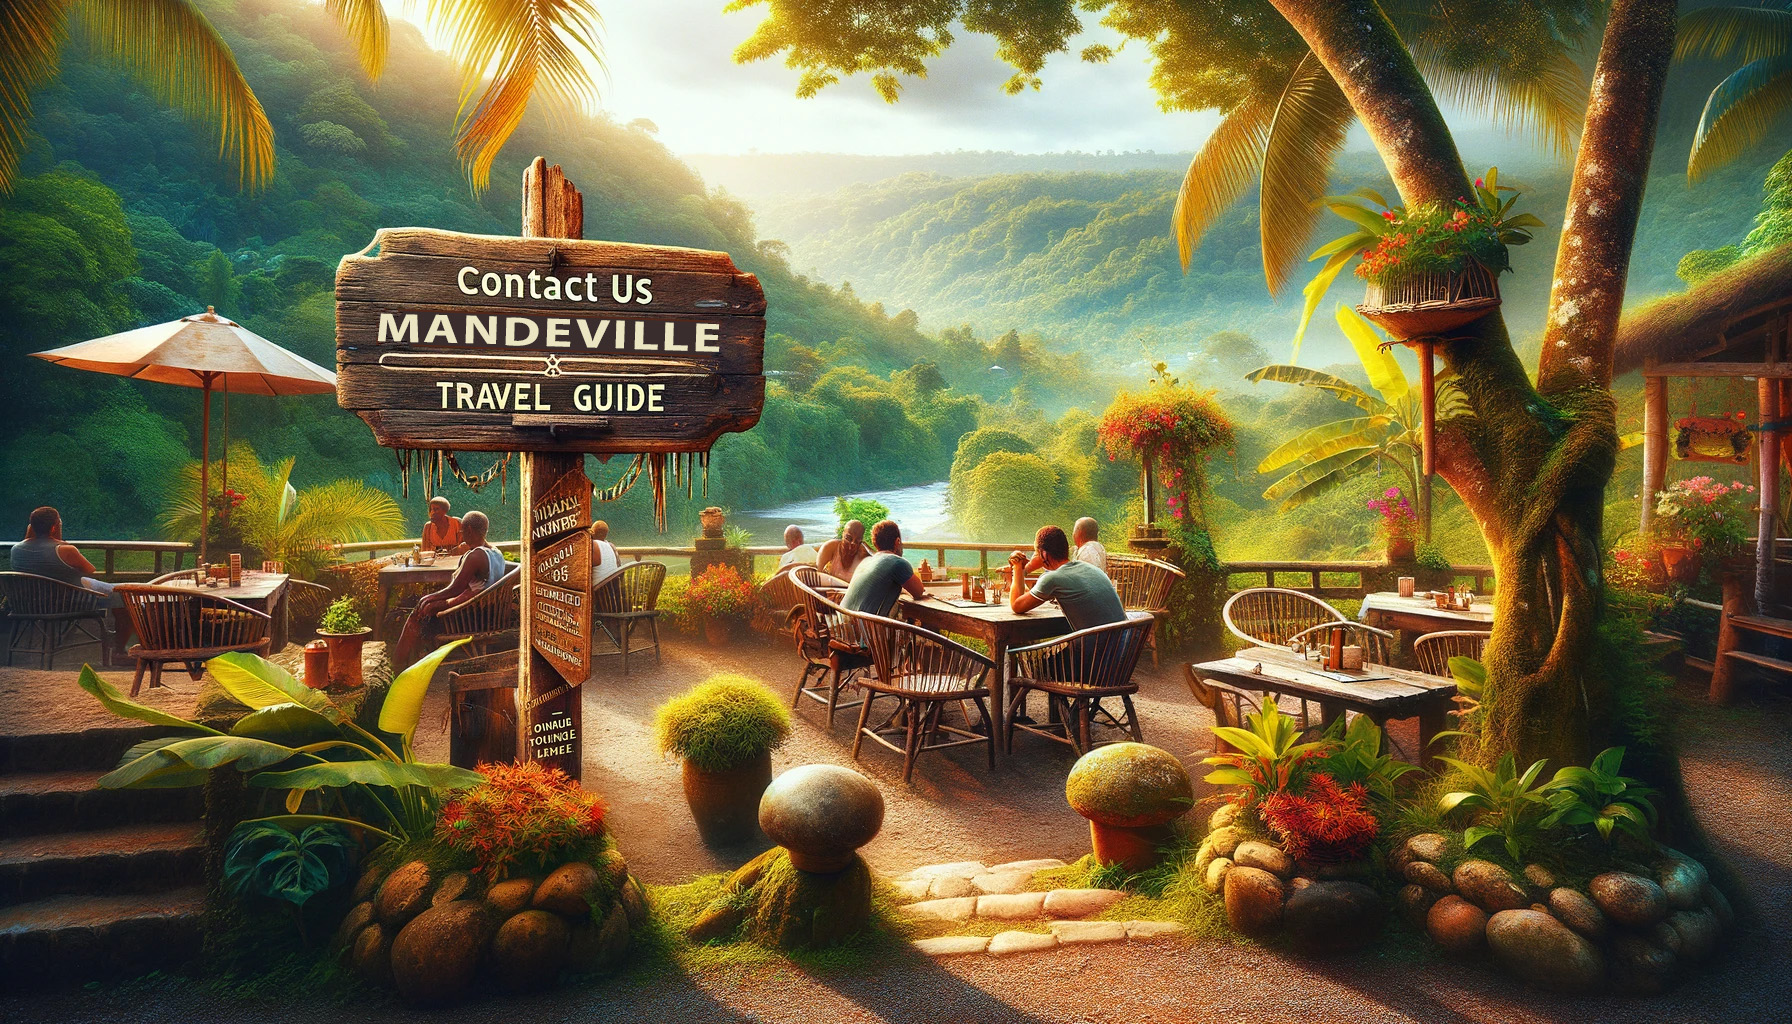 Contact Us - Mandeville Travel Guide